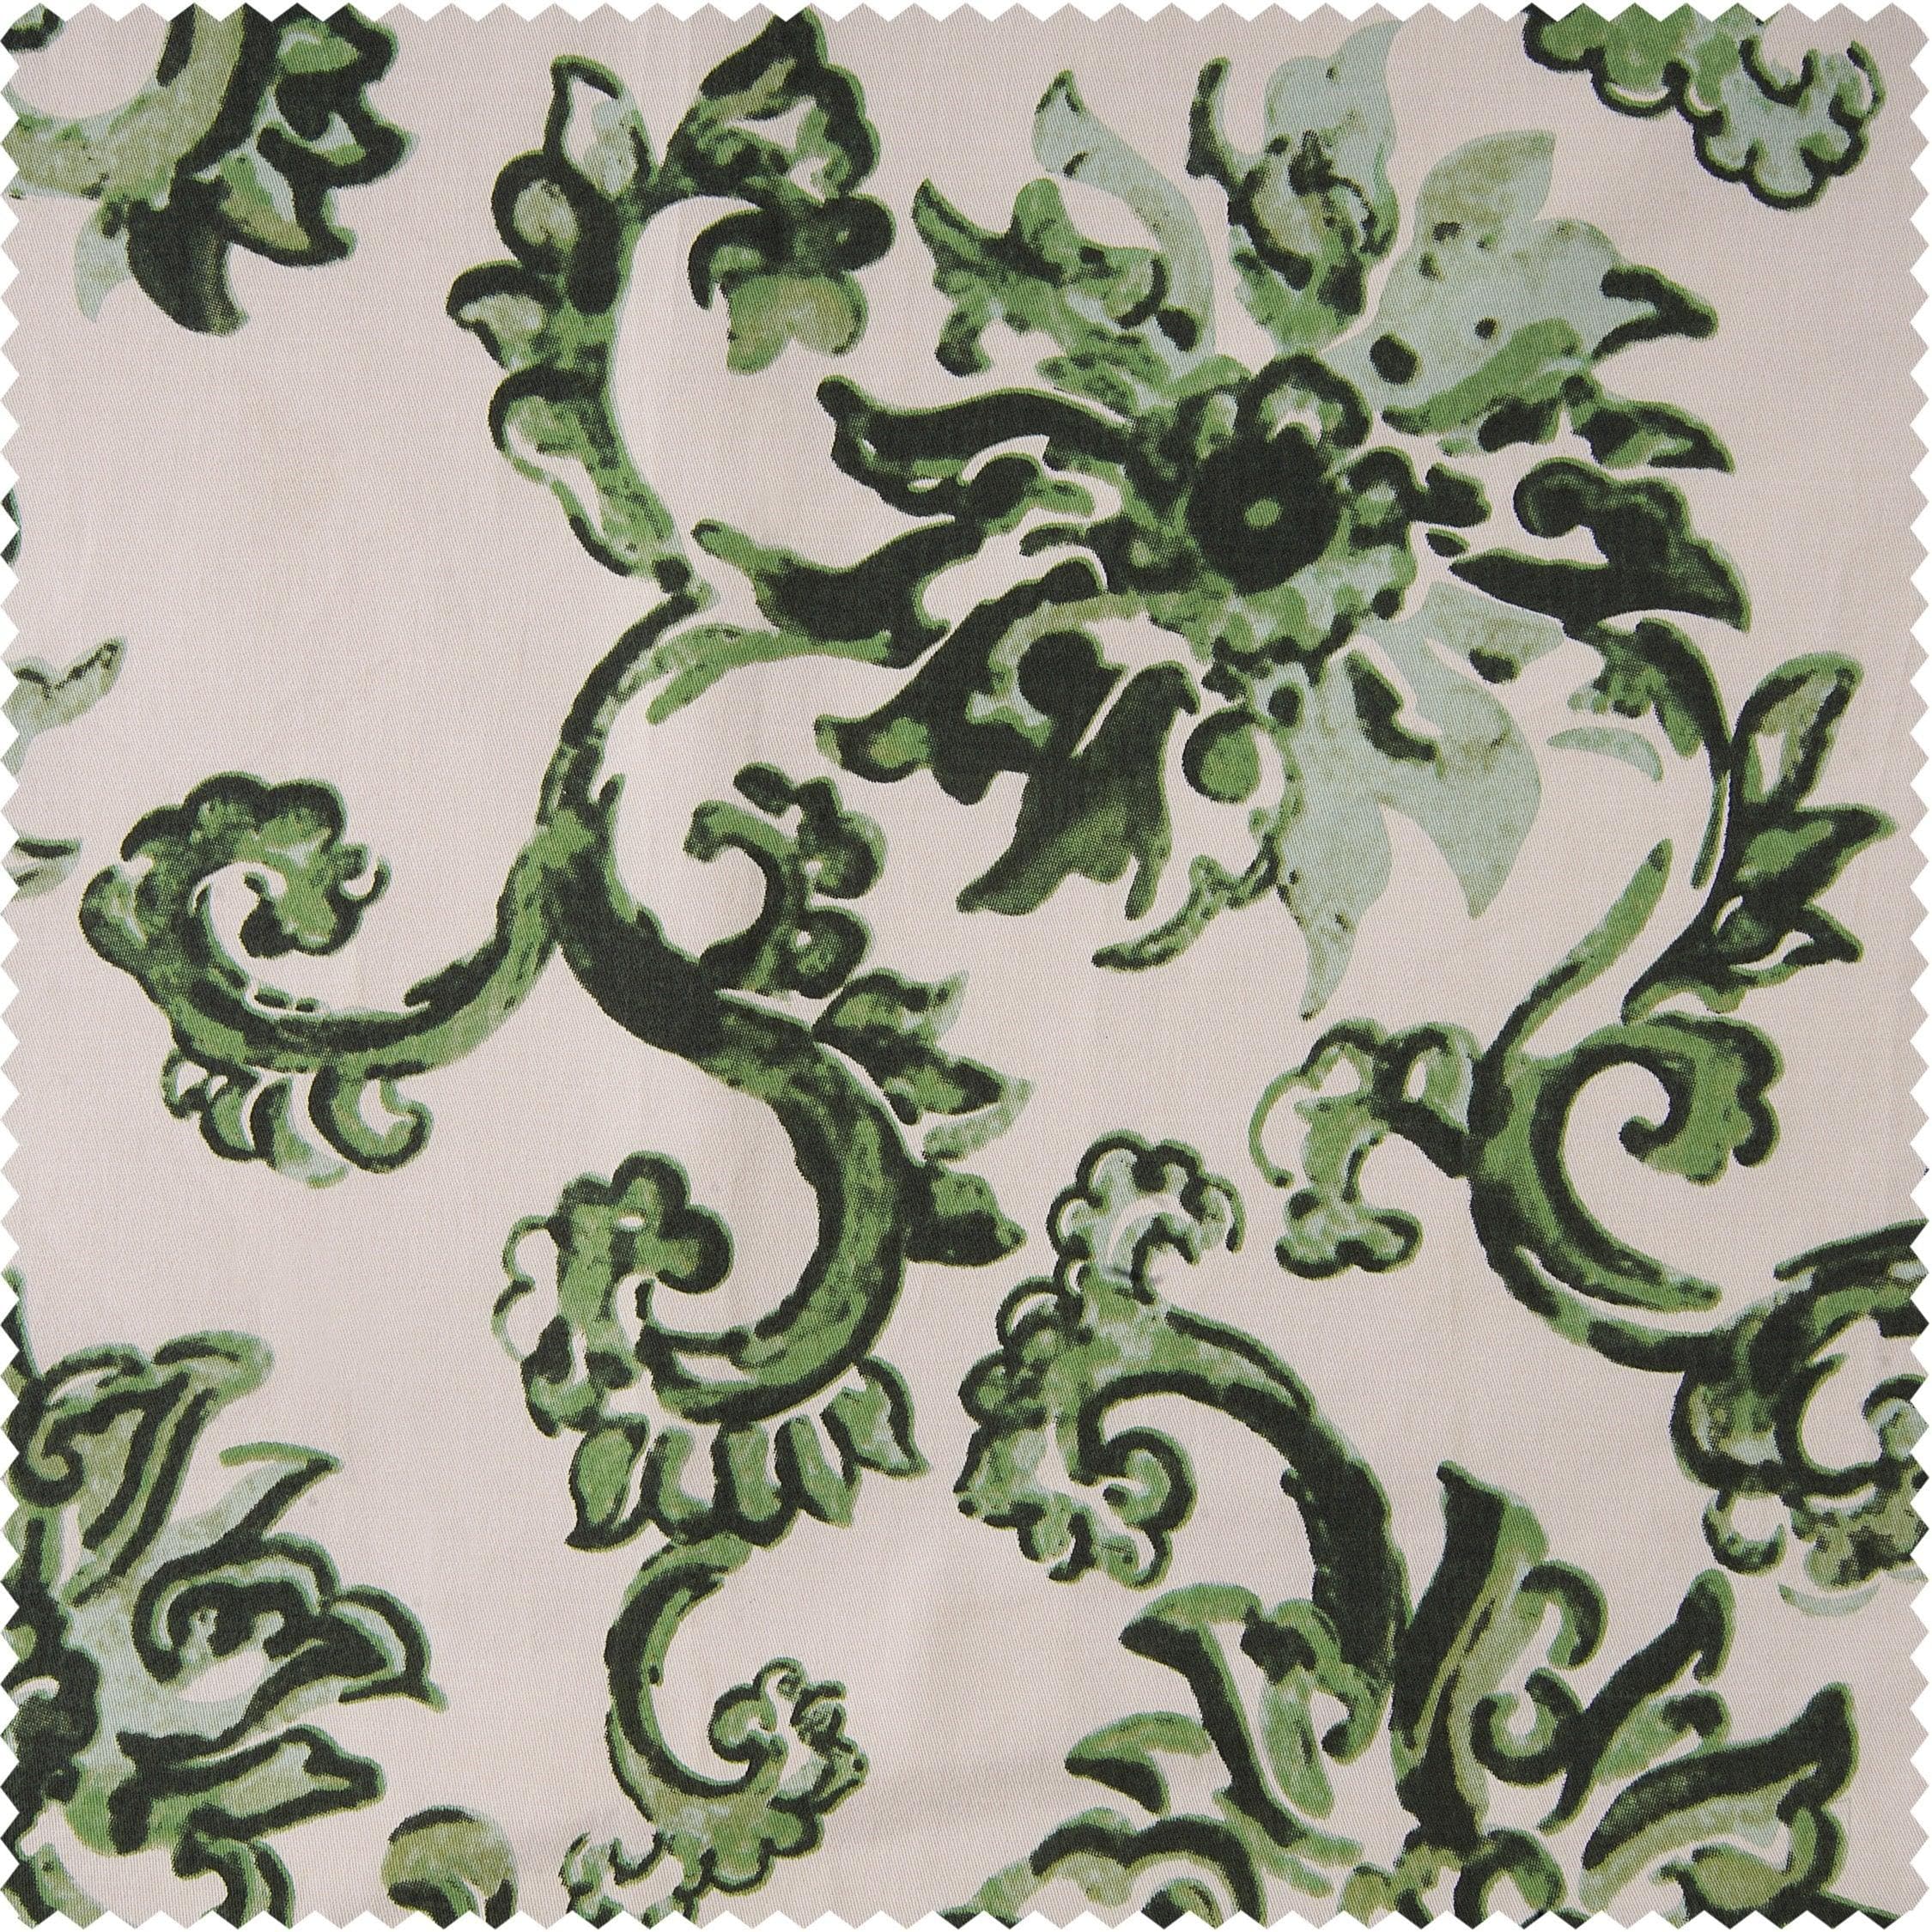 Indonesian Green Printed Cotton Hotel Blackout Swatch